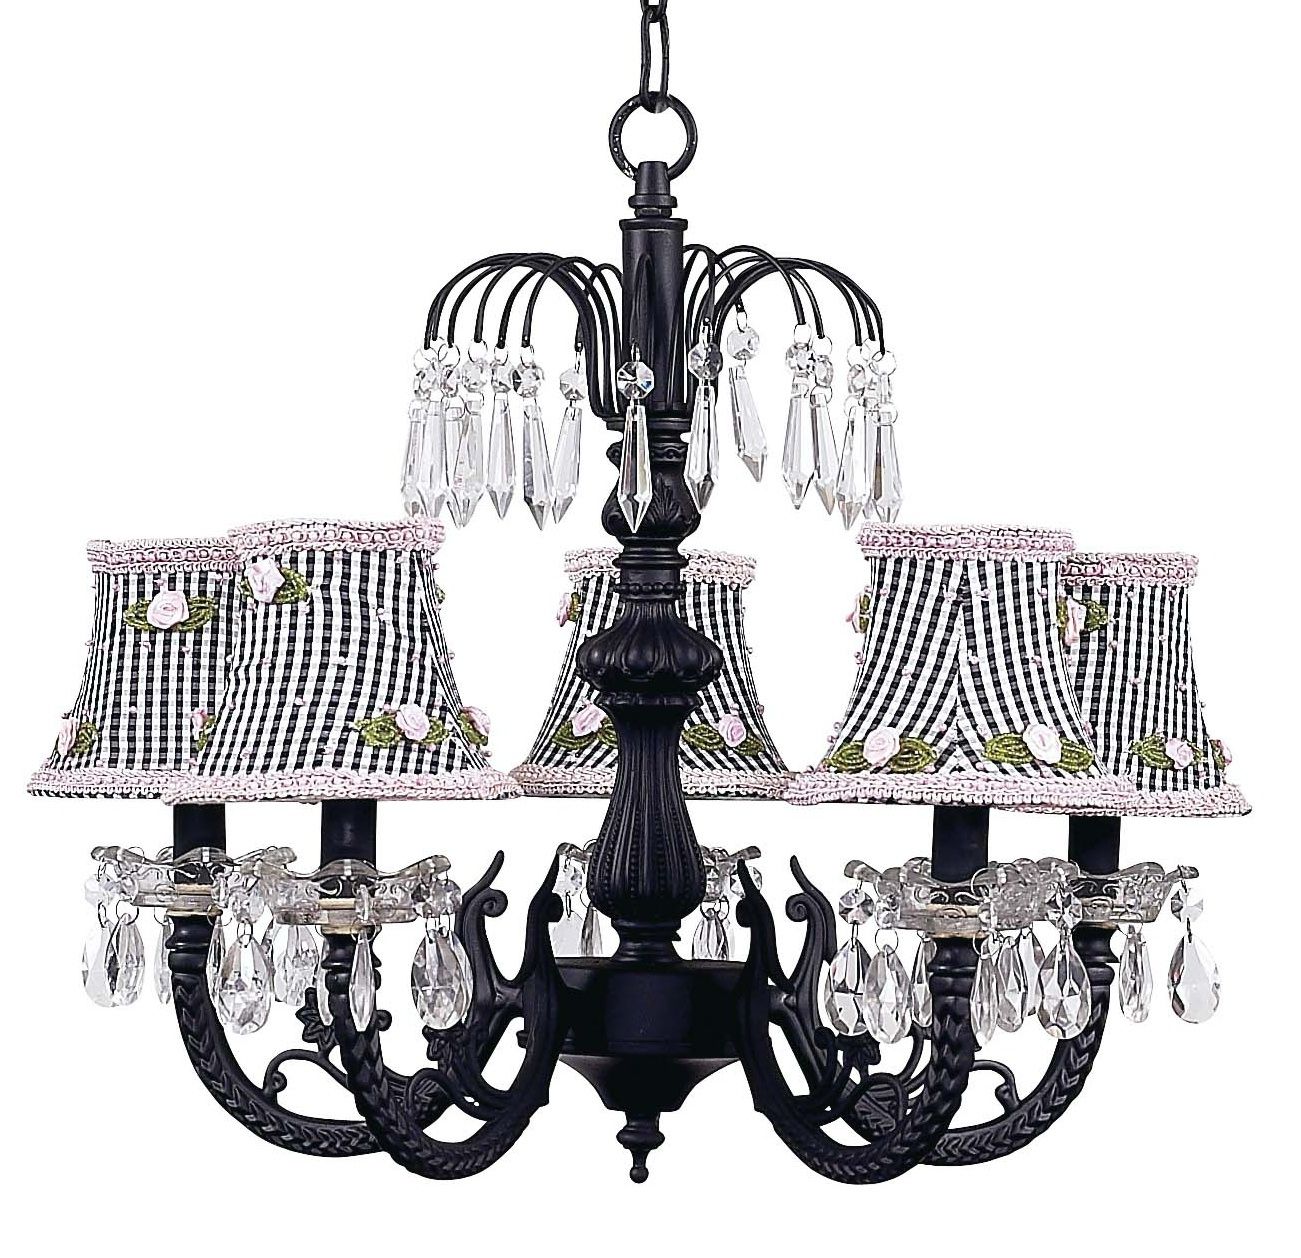 Chic Waterfall Black Chandelier With Check Shades 7047 2255 Throughout Vintage Black Chandelier (View 8 of 15)